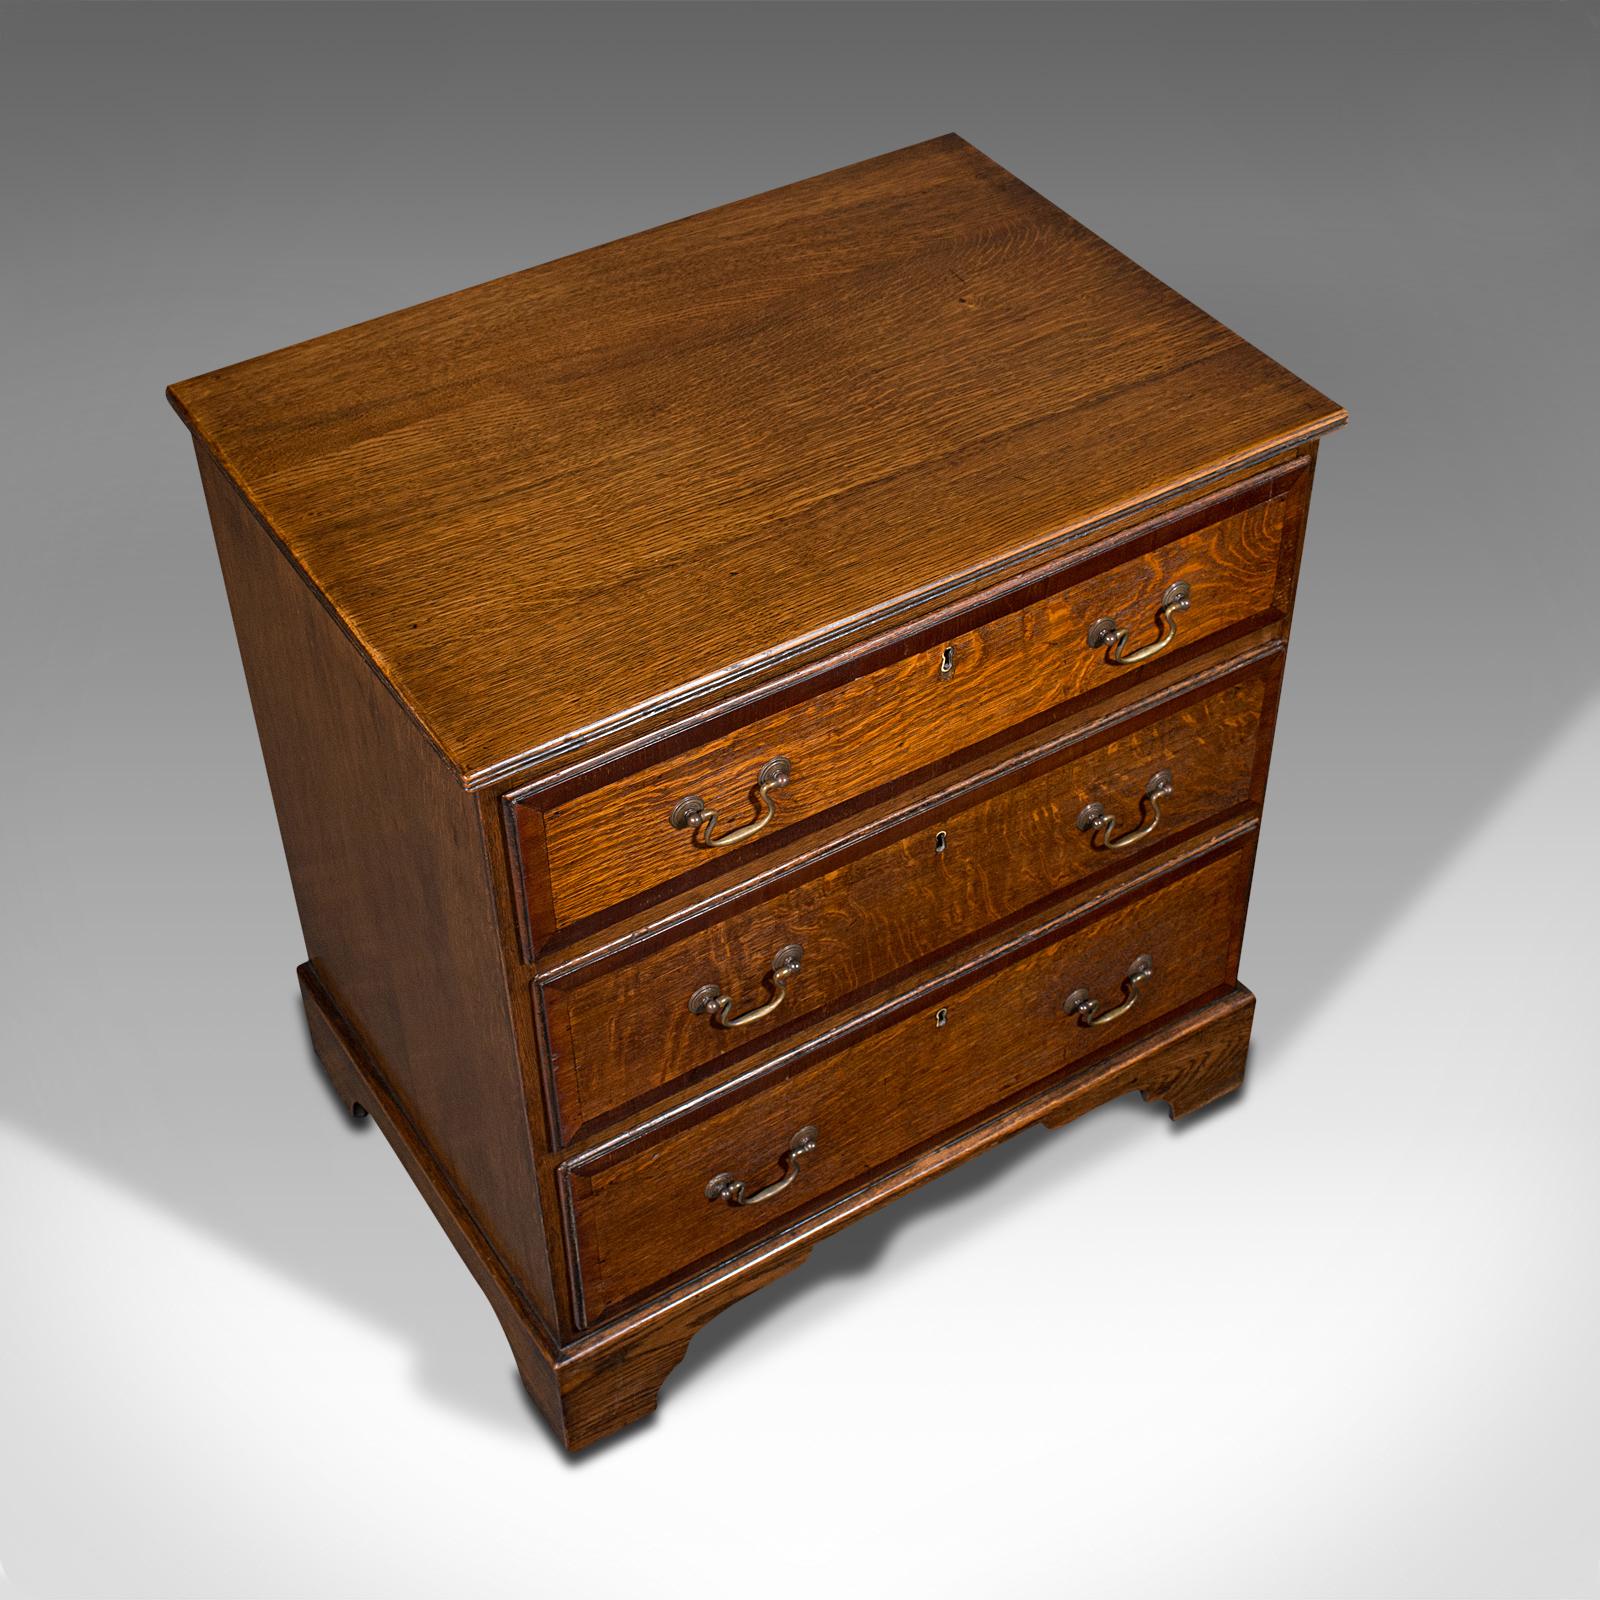 Antique Compact Chest of Drawers, English, Oak, Bedside Cabinet, Georgian, 1800 In Good Condition For Sale In Hele, Devon, GB